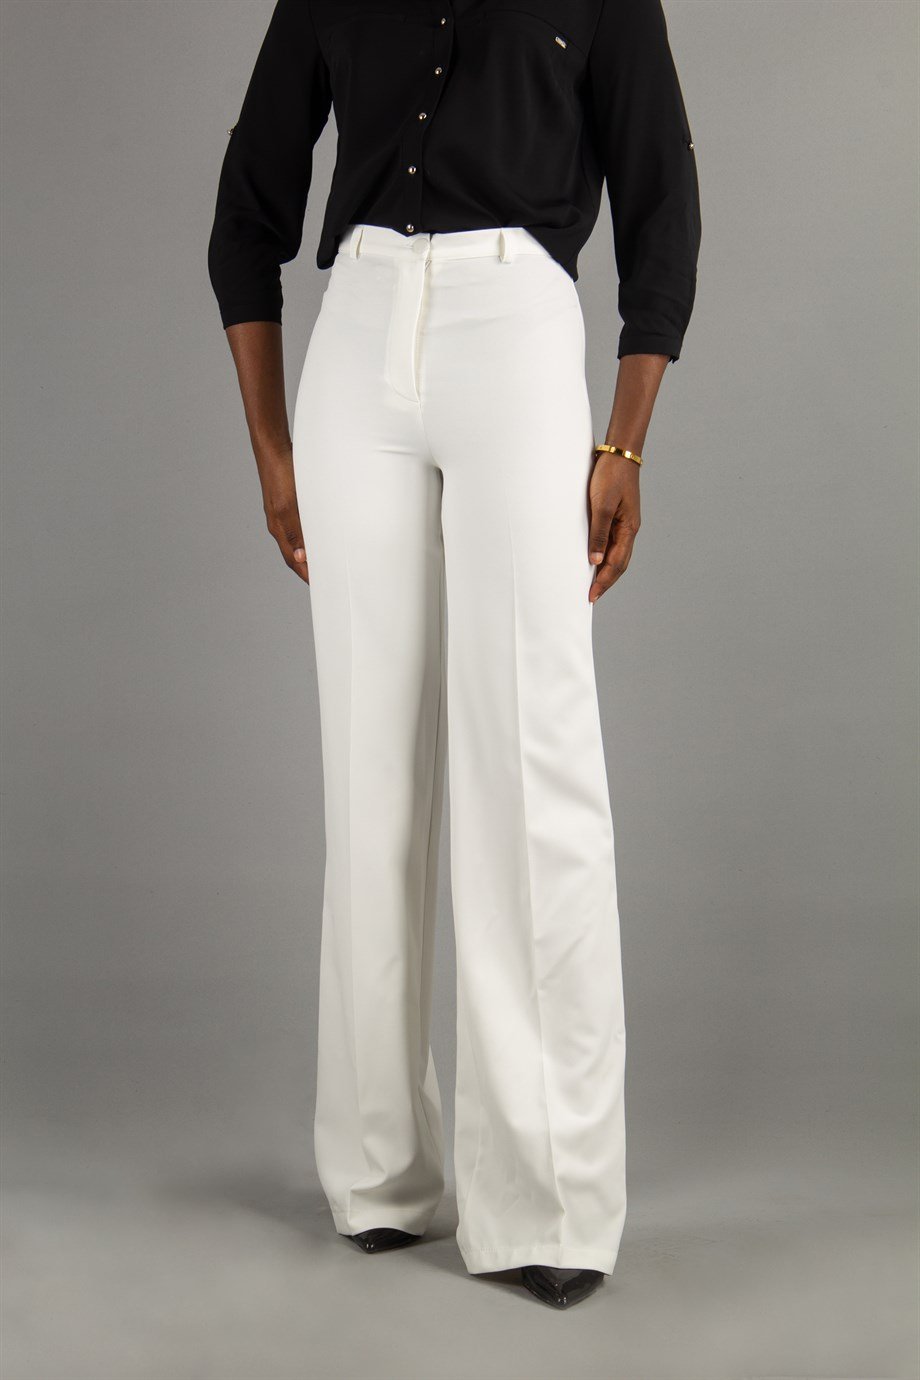 Classic Pants Office Trouser - White - Wholesale Womens Clothing